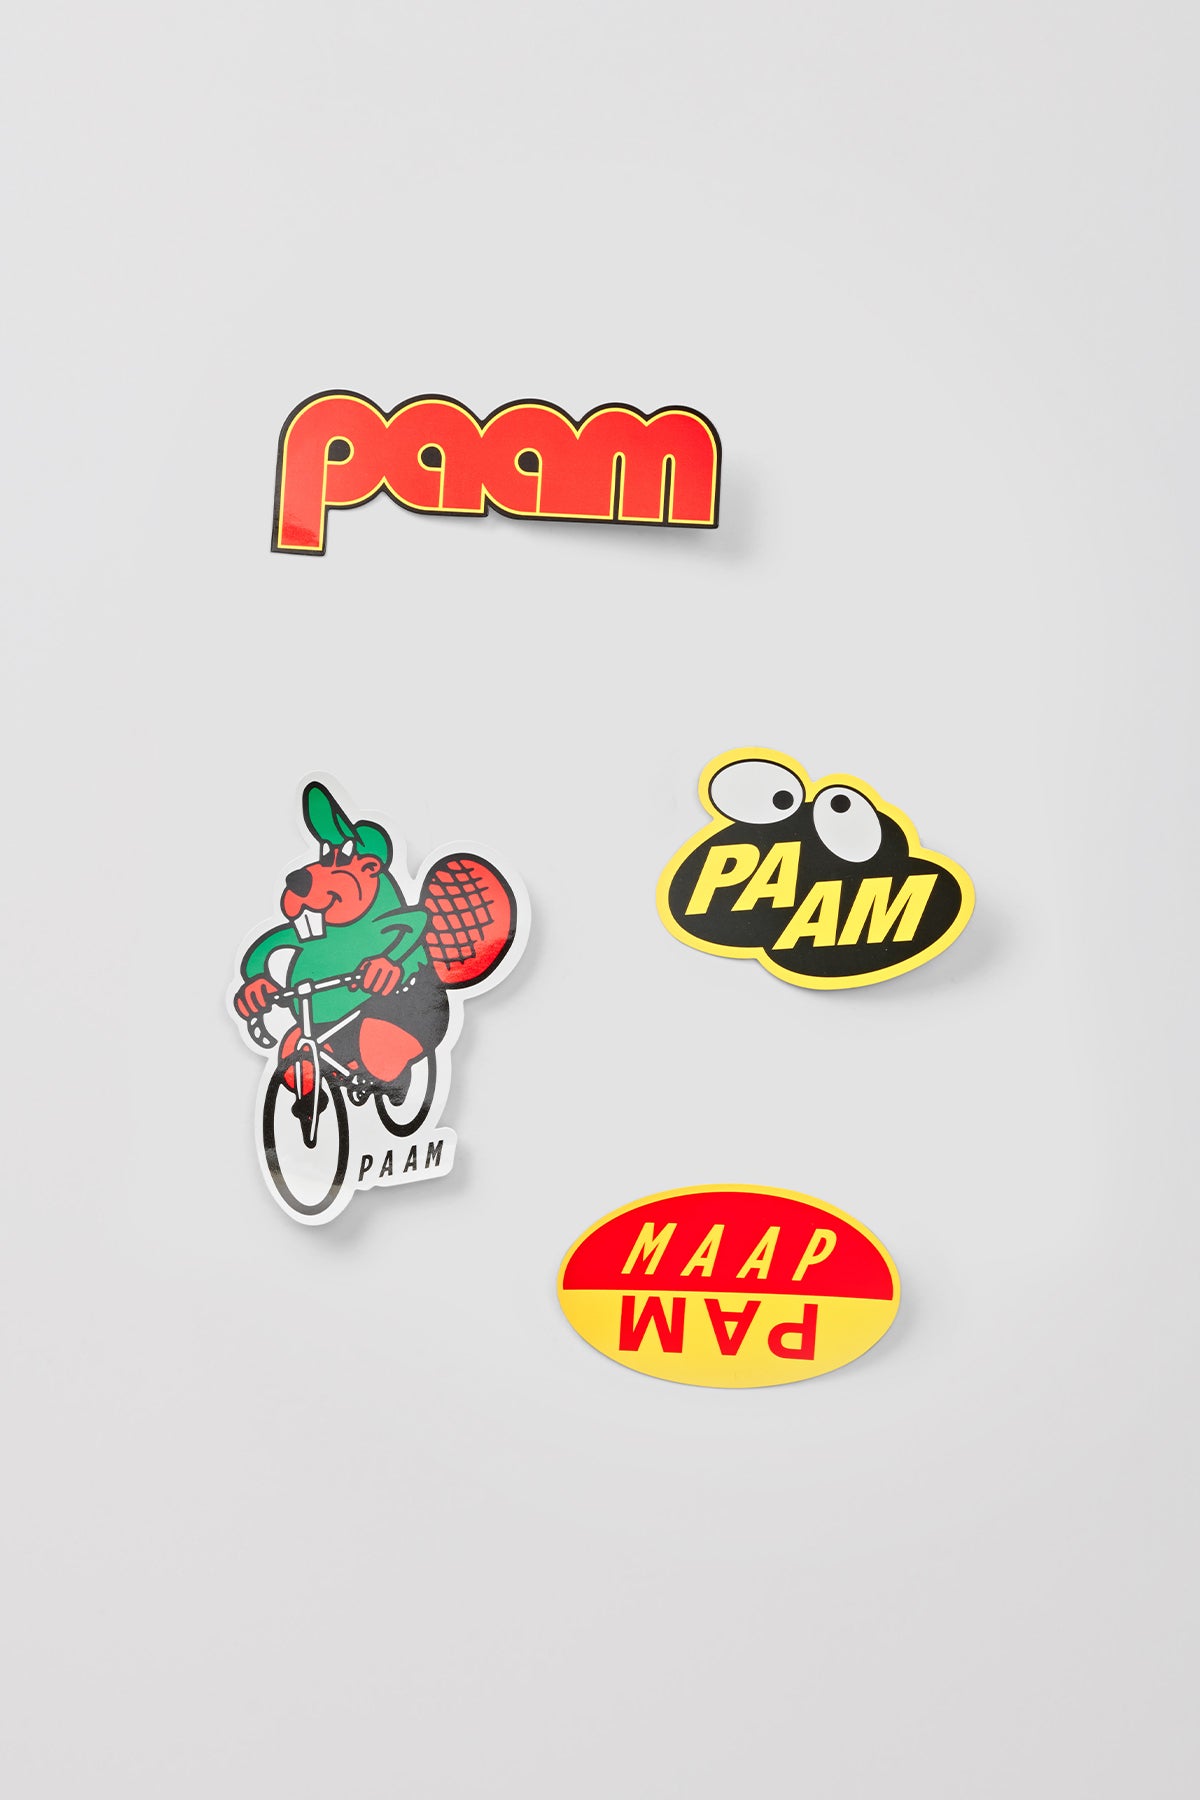 The PAAM 3.0 STICKER PACK  available online with global shipping, and in PAM Stores Melbourne and Sydney.